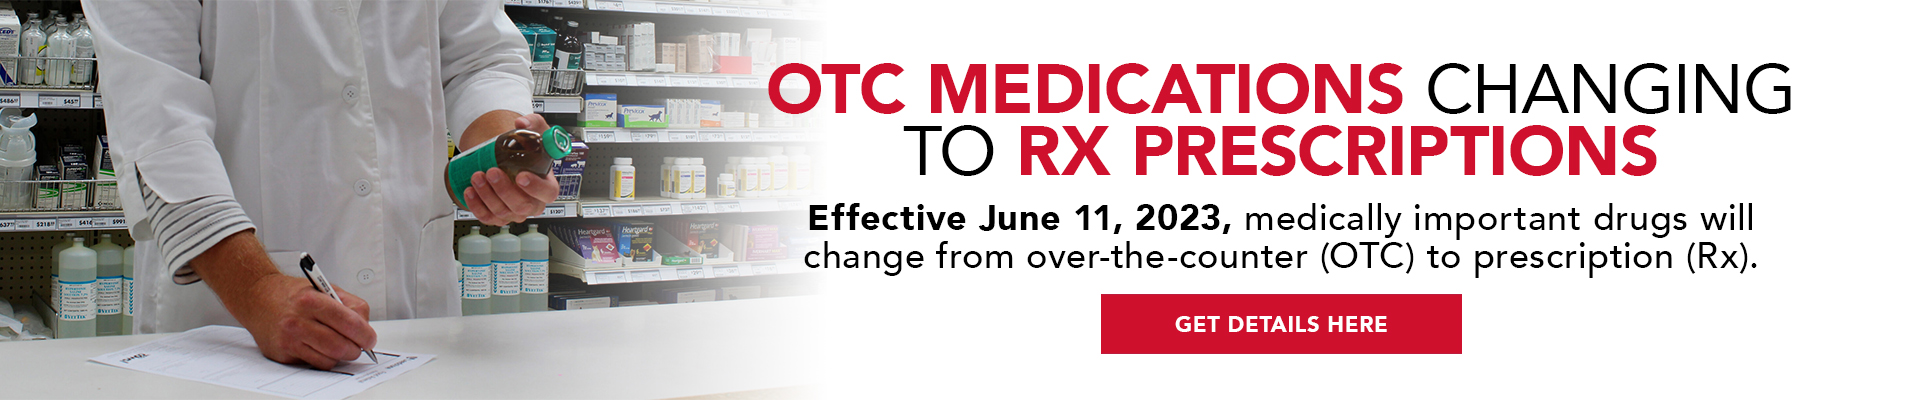 Effective June, 2023, medically important livestock drugs will change from over-the-counter (OTC) to prescription (Rx).